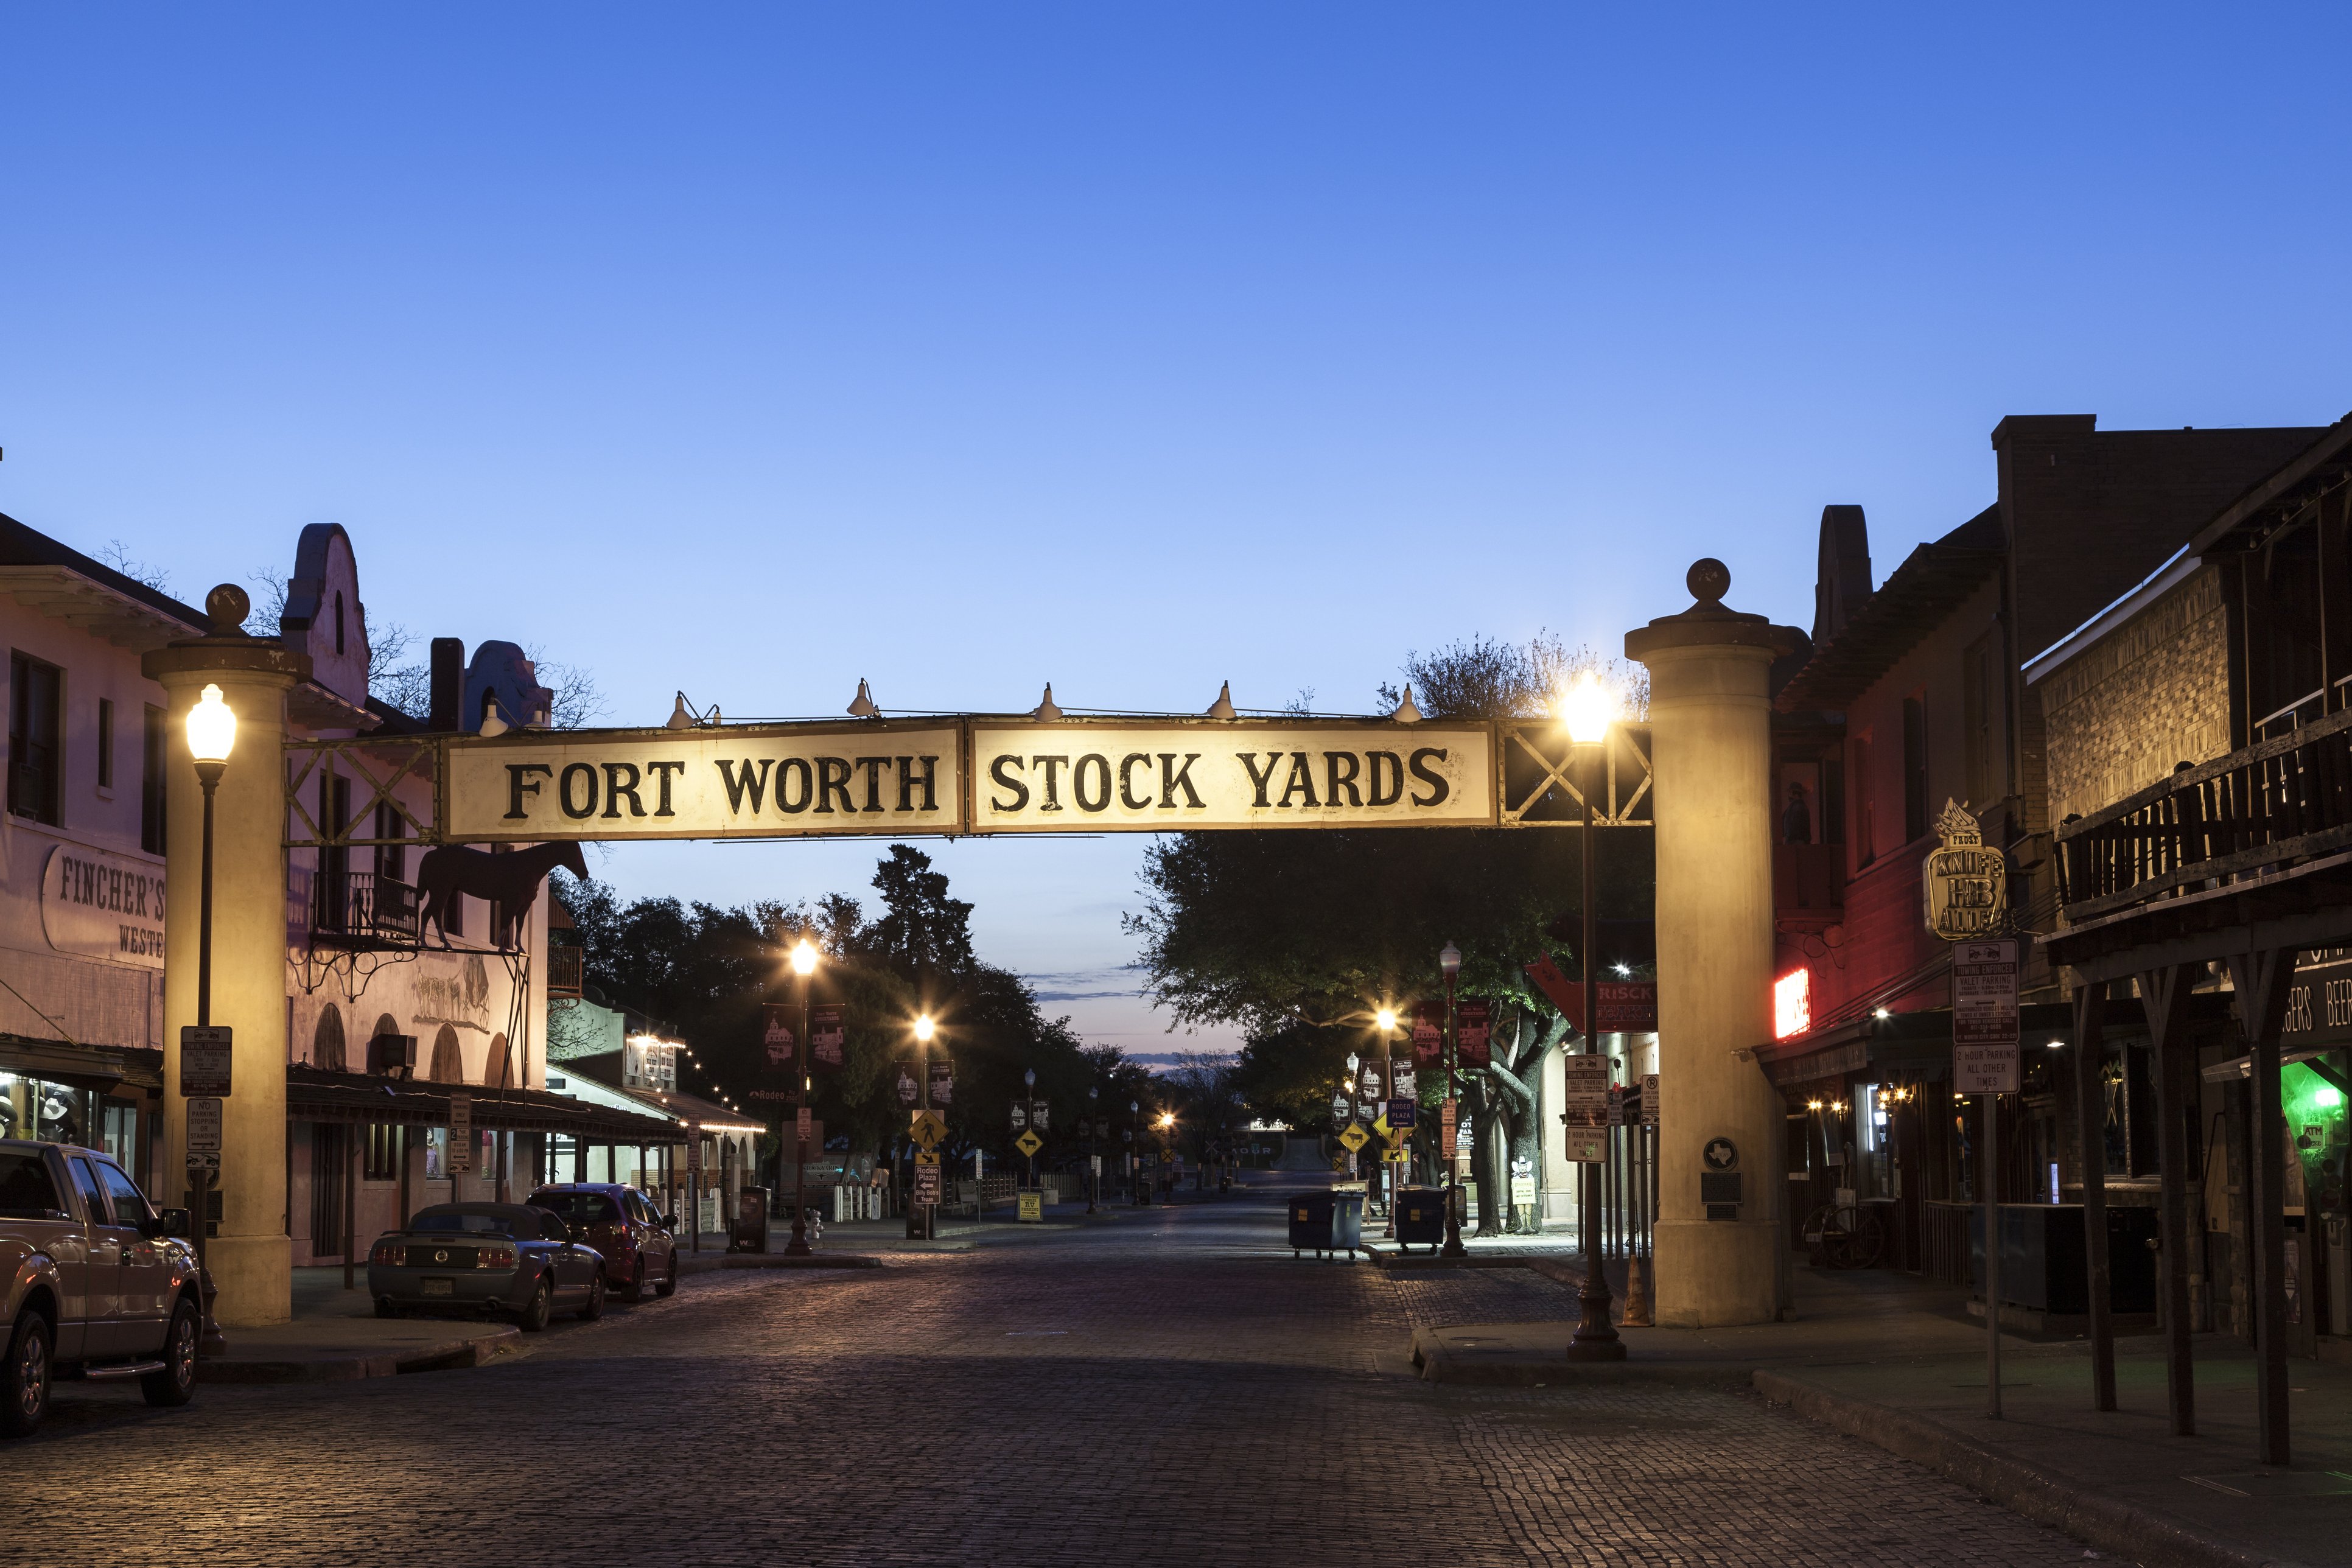 One of the spooky, haunted locations you'll visit on the The Ghosts of Fort Worth Tour